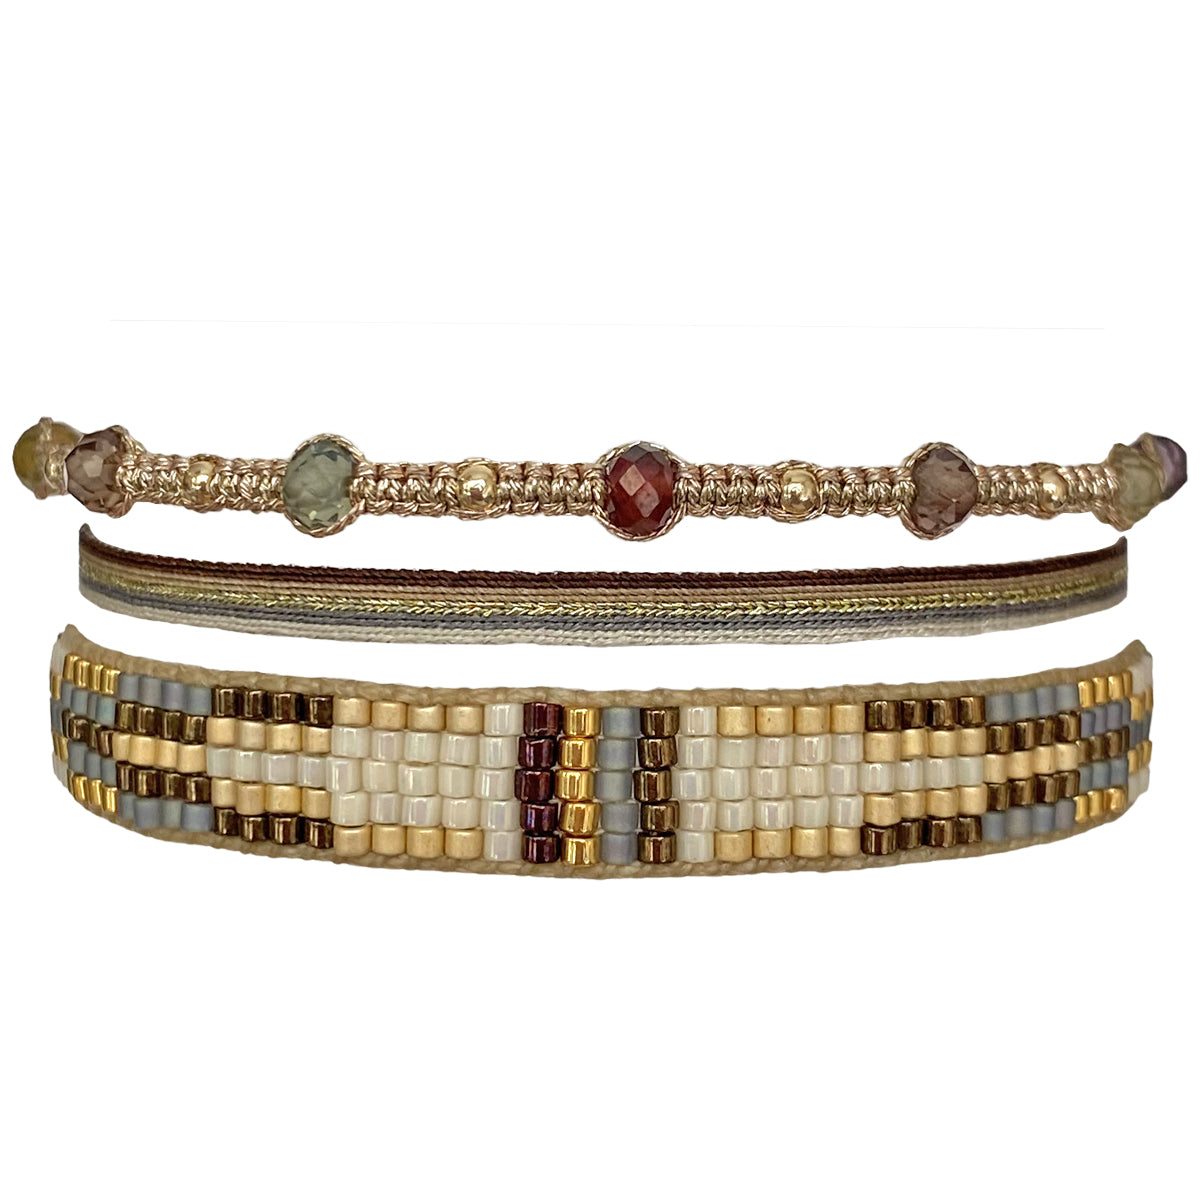      Intermixed Semi-precious stones     14 k gold filled beads     Glass beads     polyester threads,     Handwoven adjustable bracelets     Width, 8mm, 3mm, 3mm     Can be worn in the water